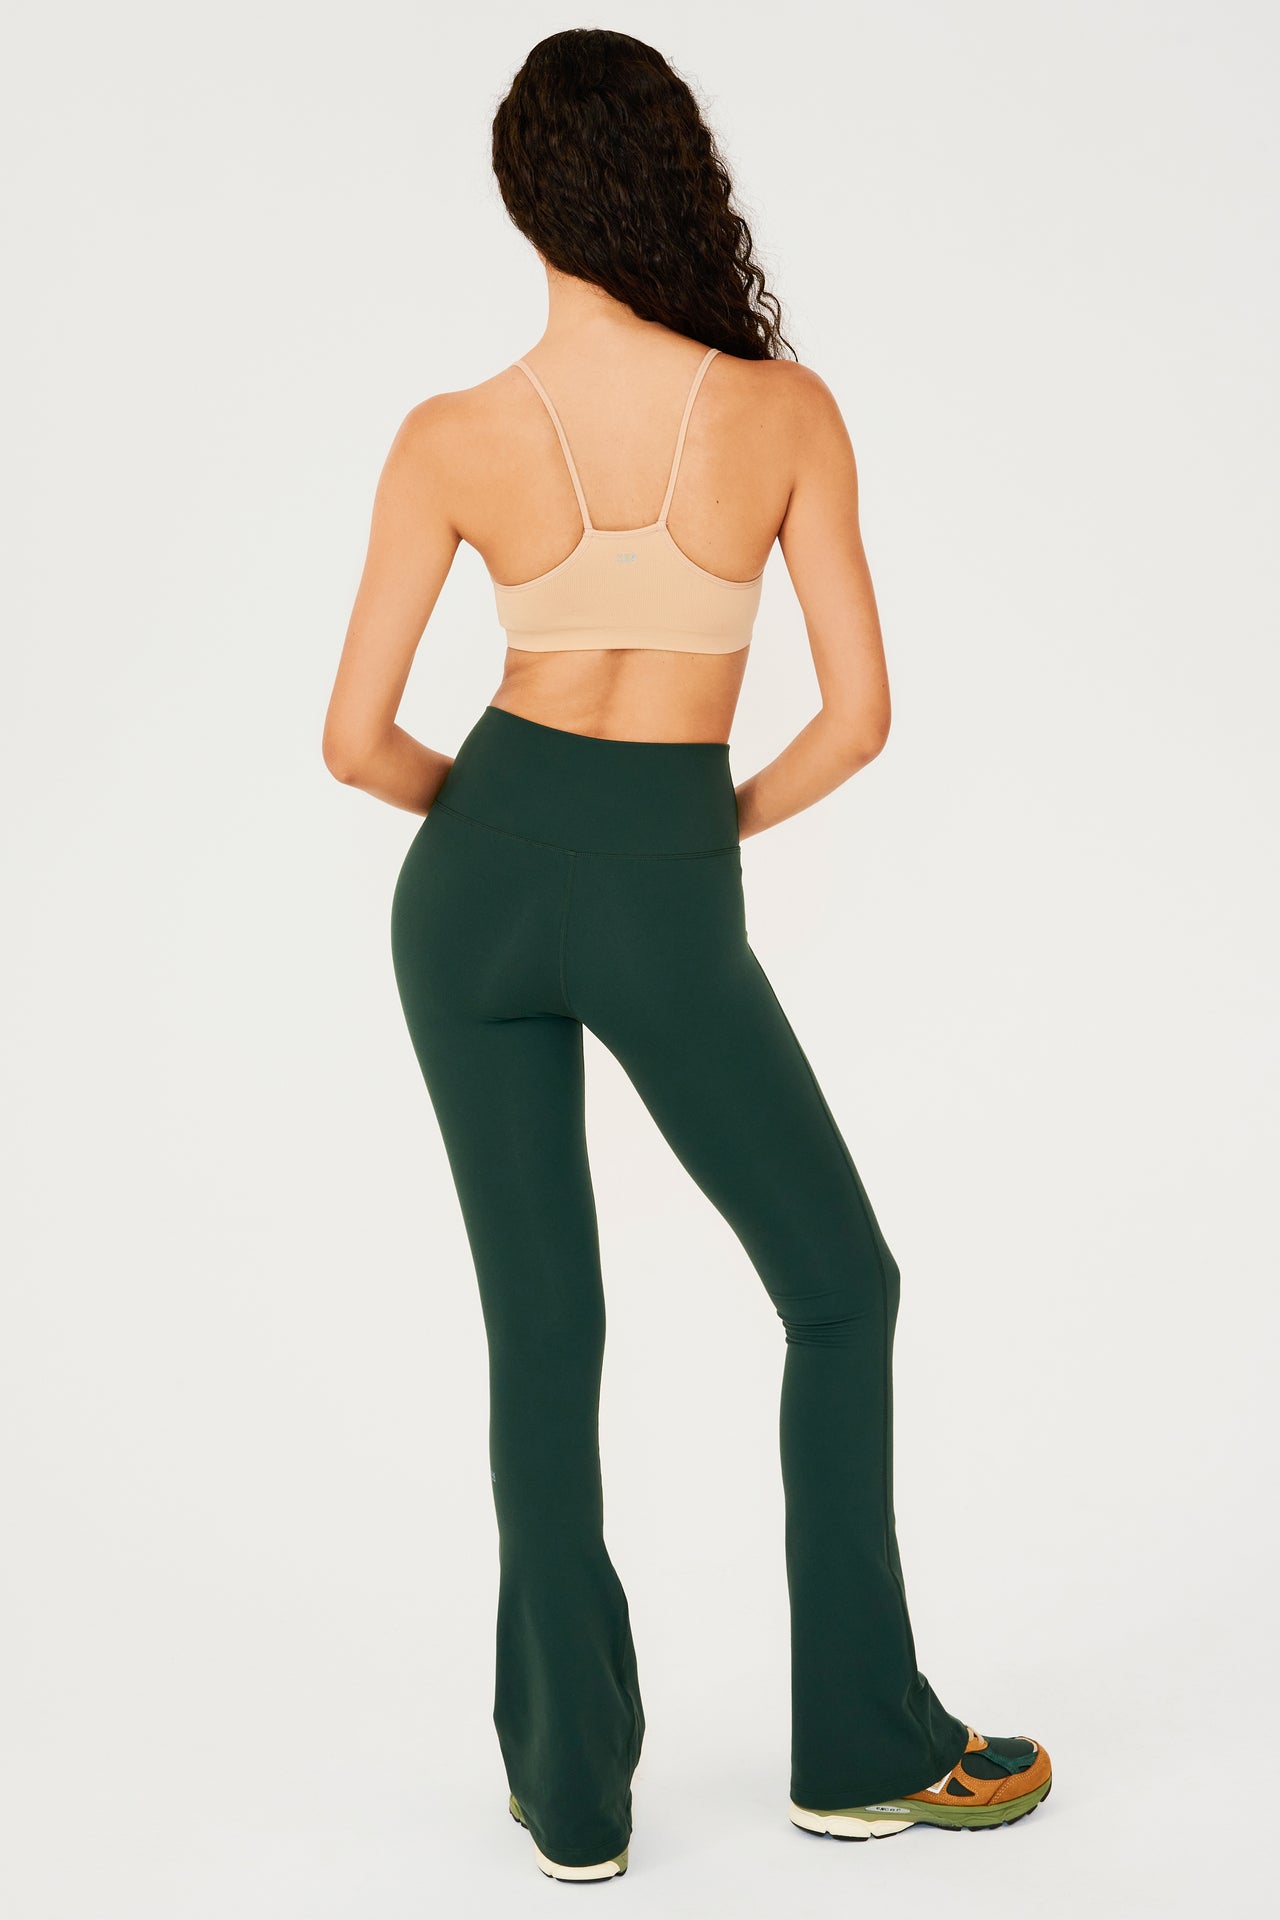 Full back view of woman with dark wavy hair wearing dark green high waist below ankle length legging with wide flared bottoms with gray S59 logo on back of left calf and pale warm brown racerback bra with spaghetti straps. Paired with dark green, dark orange and light green color block shoes.